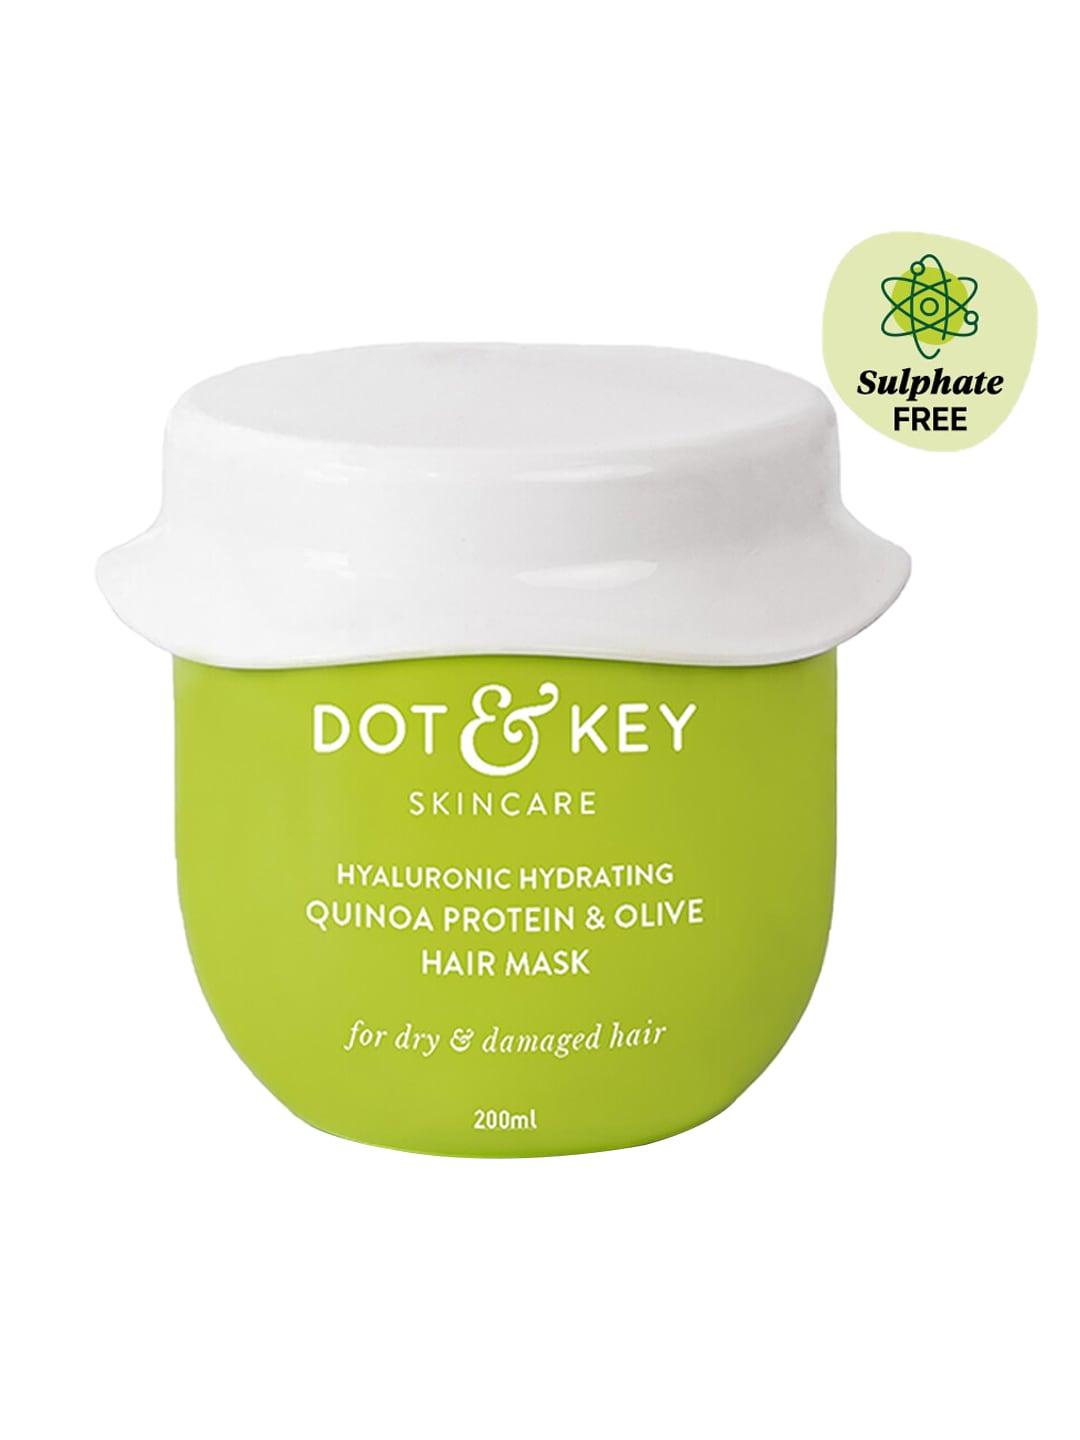 DOT & KEY Hyaluronic Hydrating Quinoa Protein & Olive Hair Mask - 200 ml